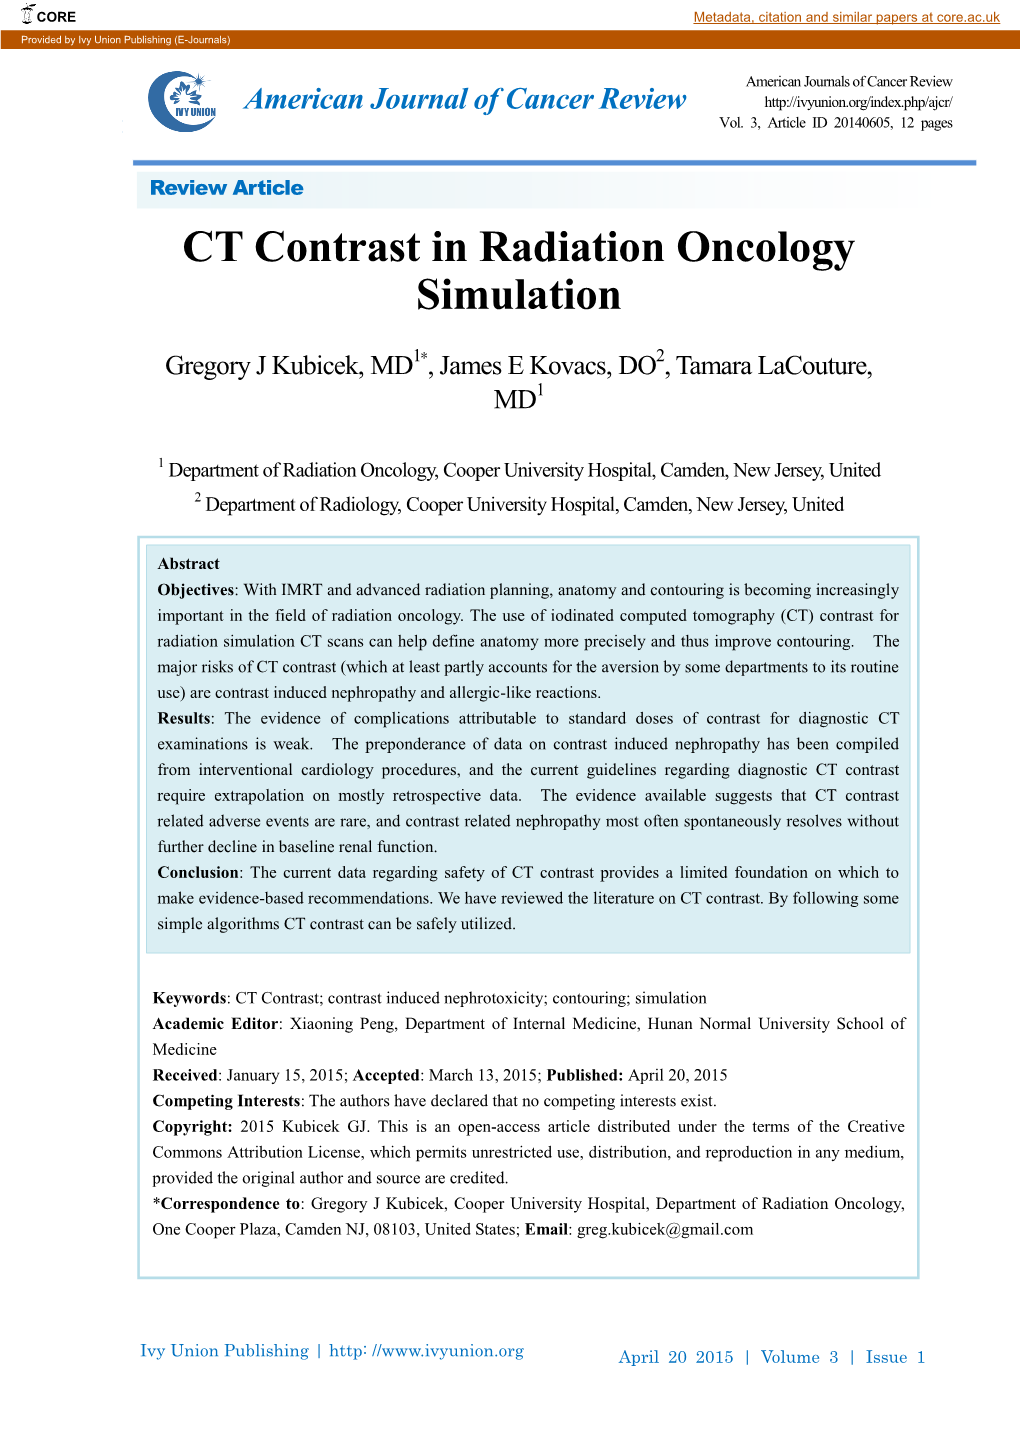 CT Contrast in Radiation Oncology Simulation